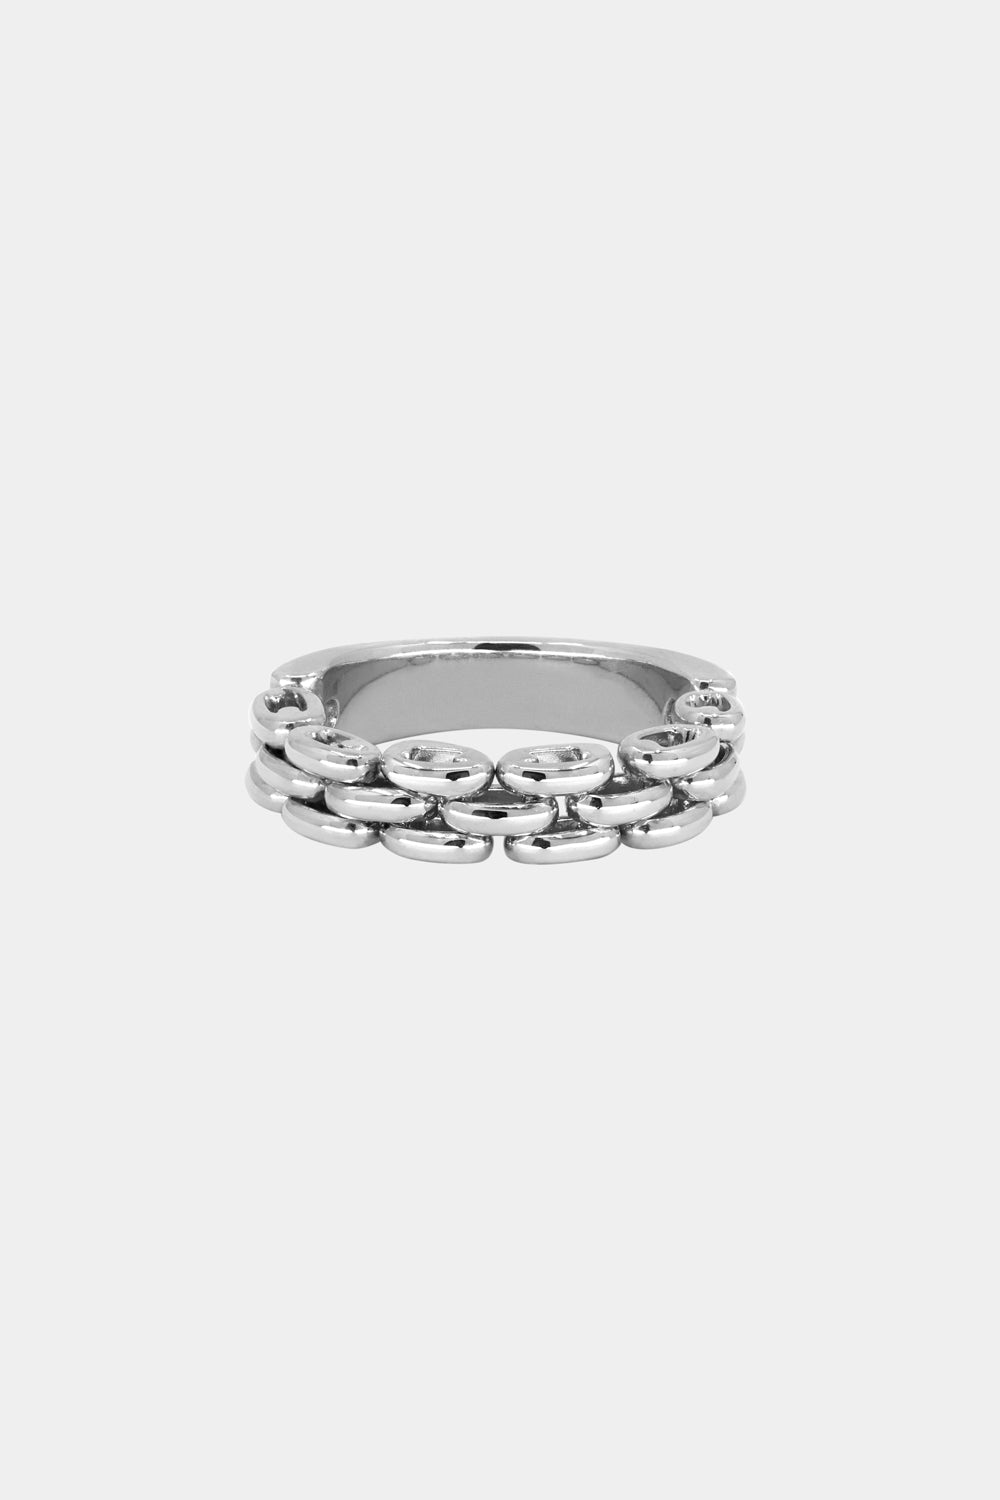 Margot Chain Ring | Silver or 9K White Gold